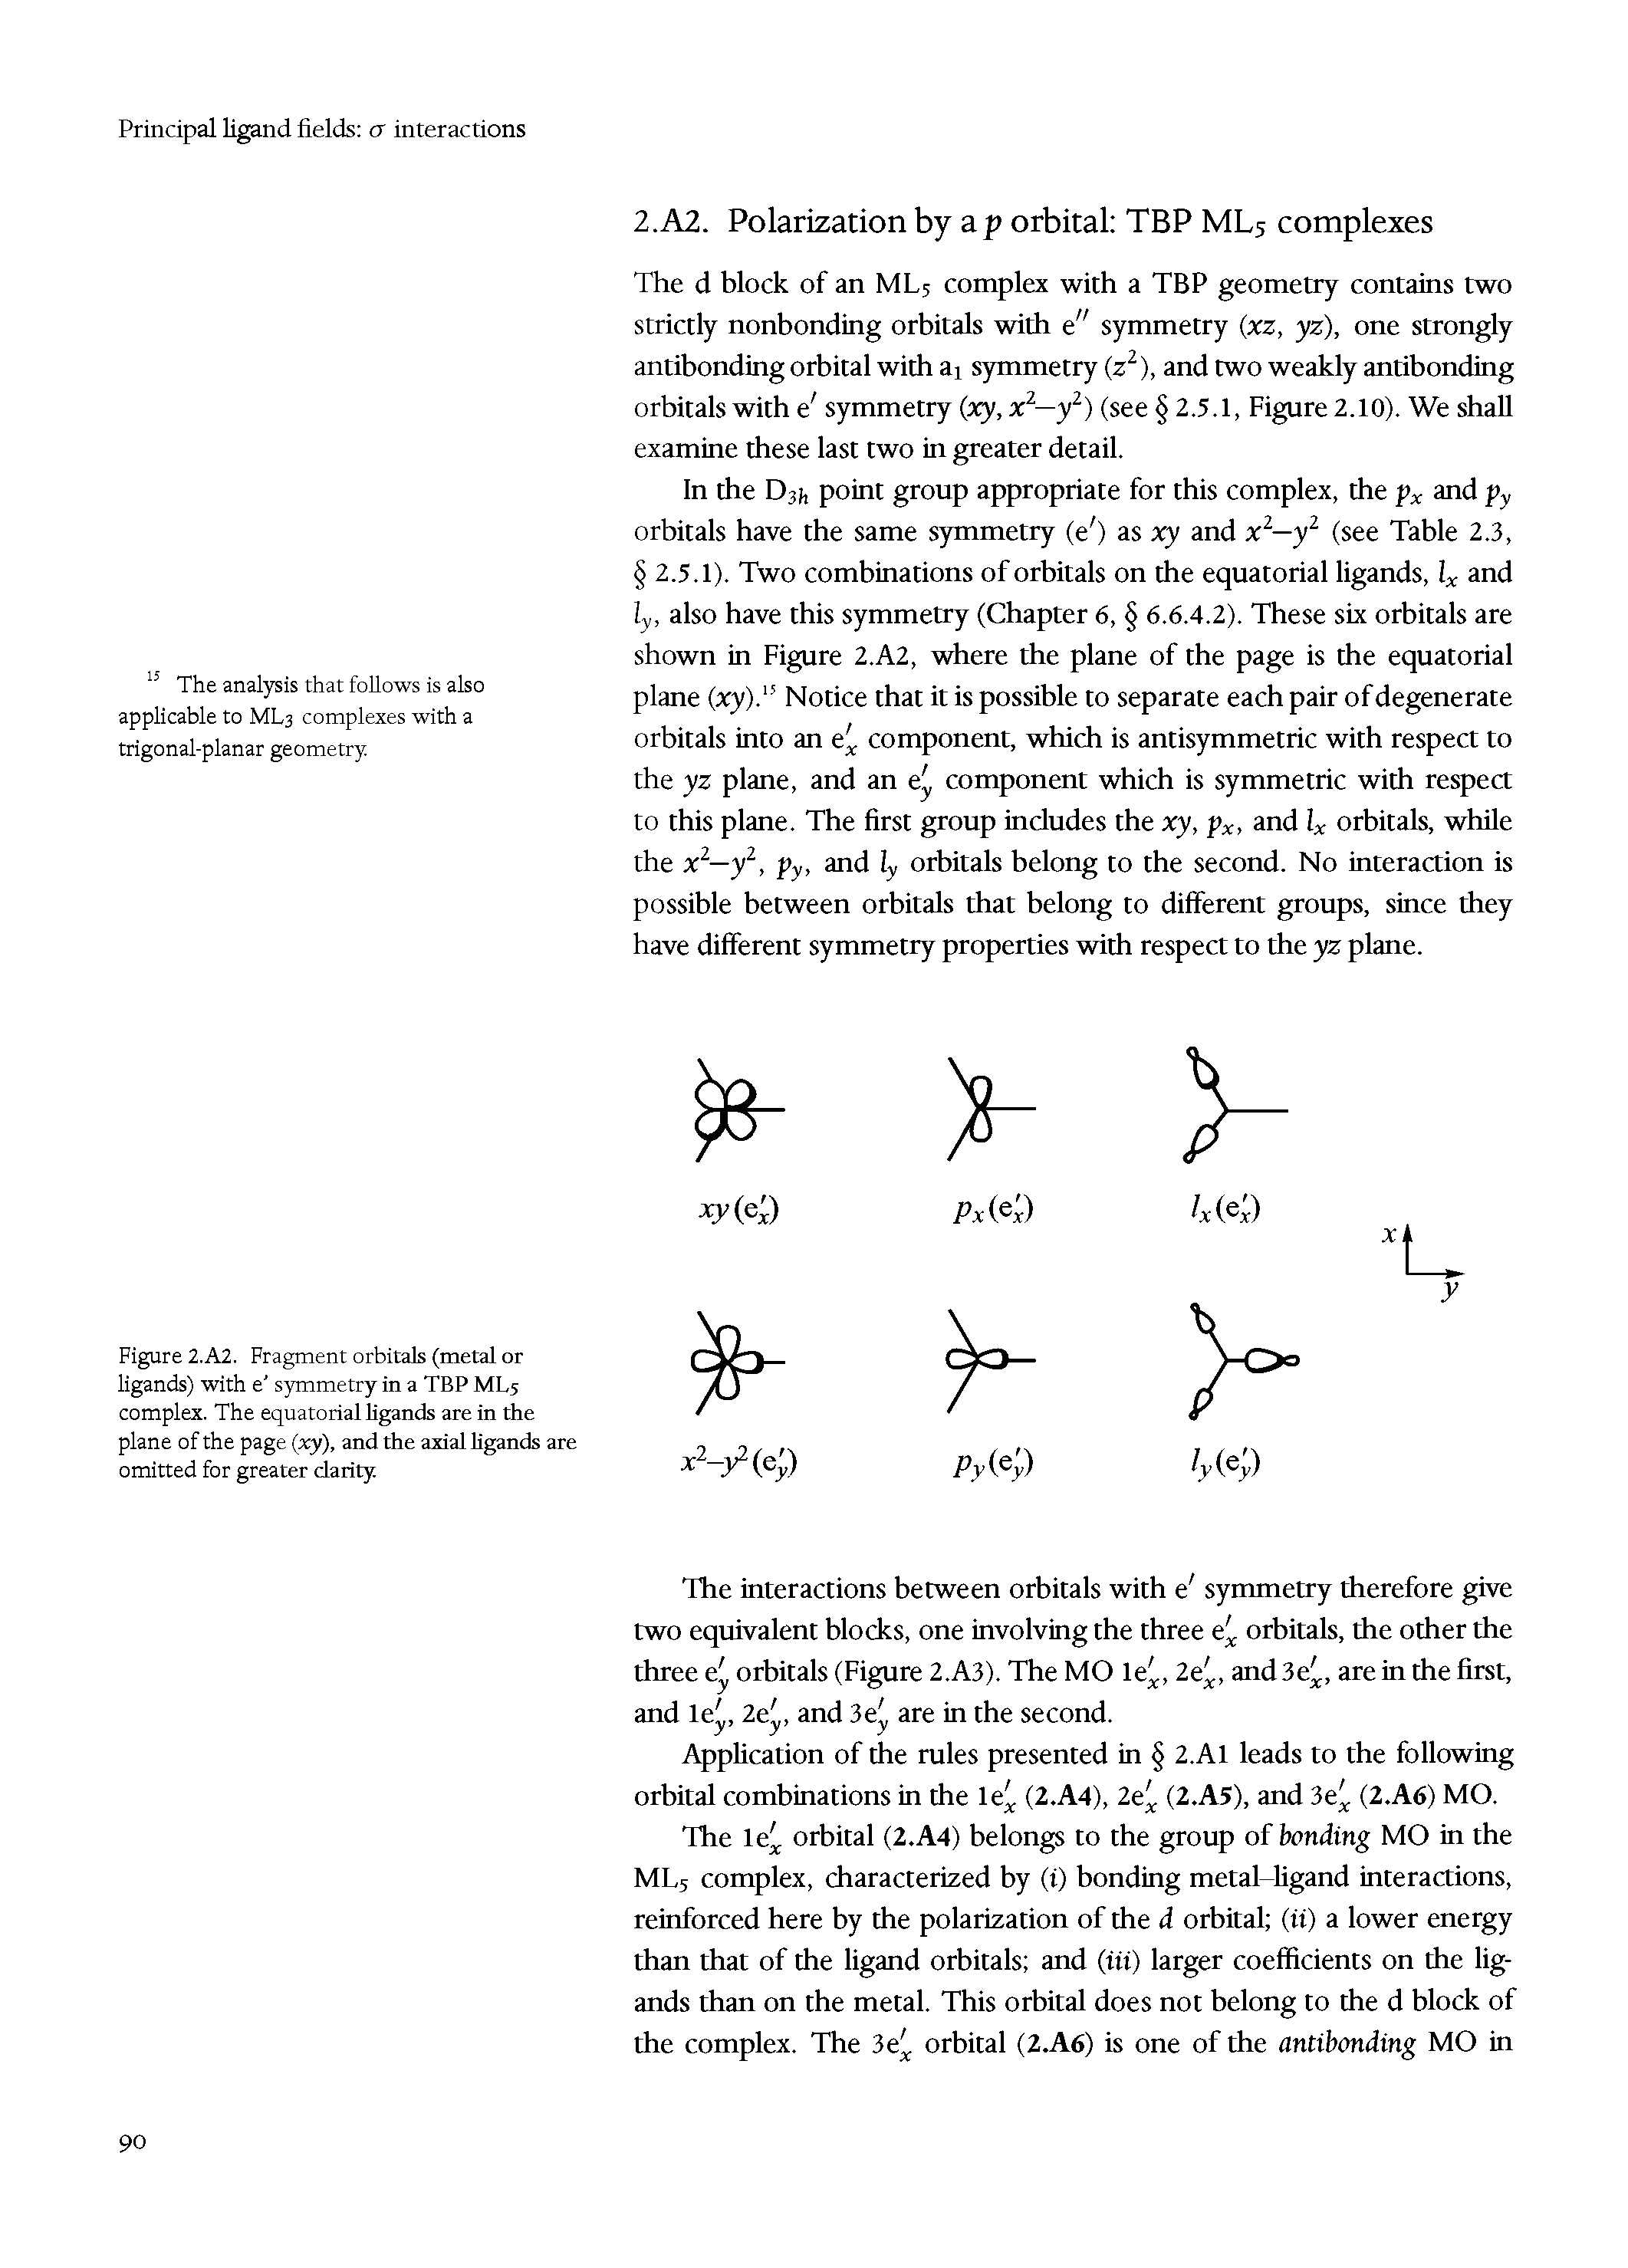 Figure 2.A2. Fragment orbitals (metal or ligands) with e" symmetry in a TBP ML5 complex. The equatorial ligands are in the plane of the page (xy), and the axial ligands are omitted for greater darity...